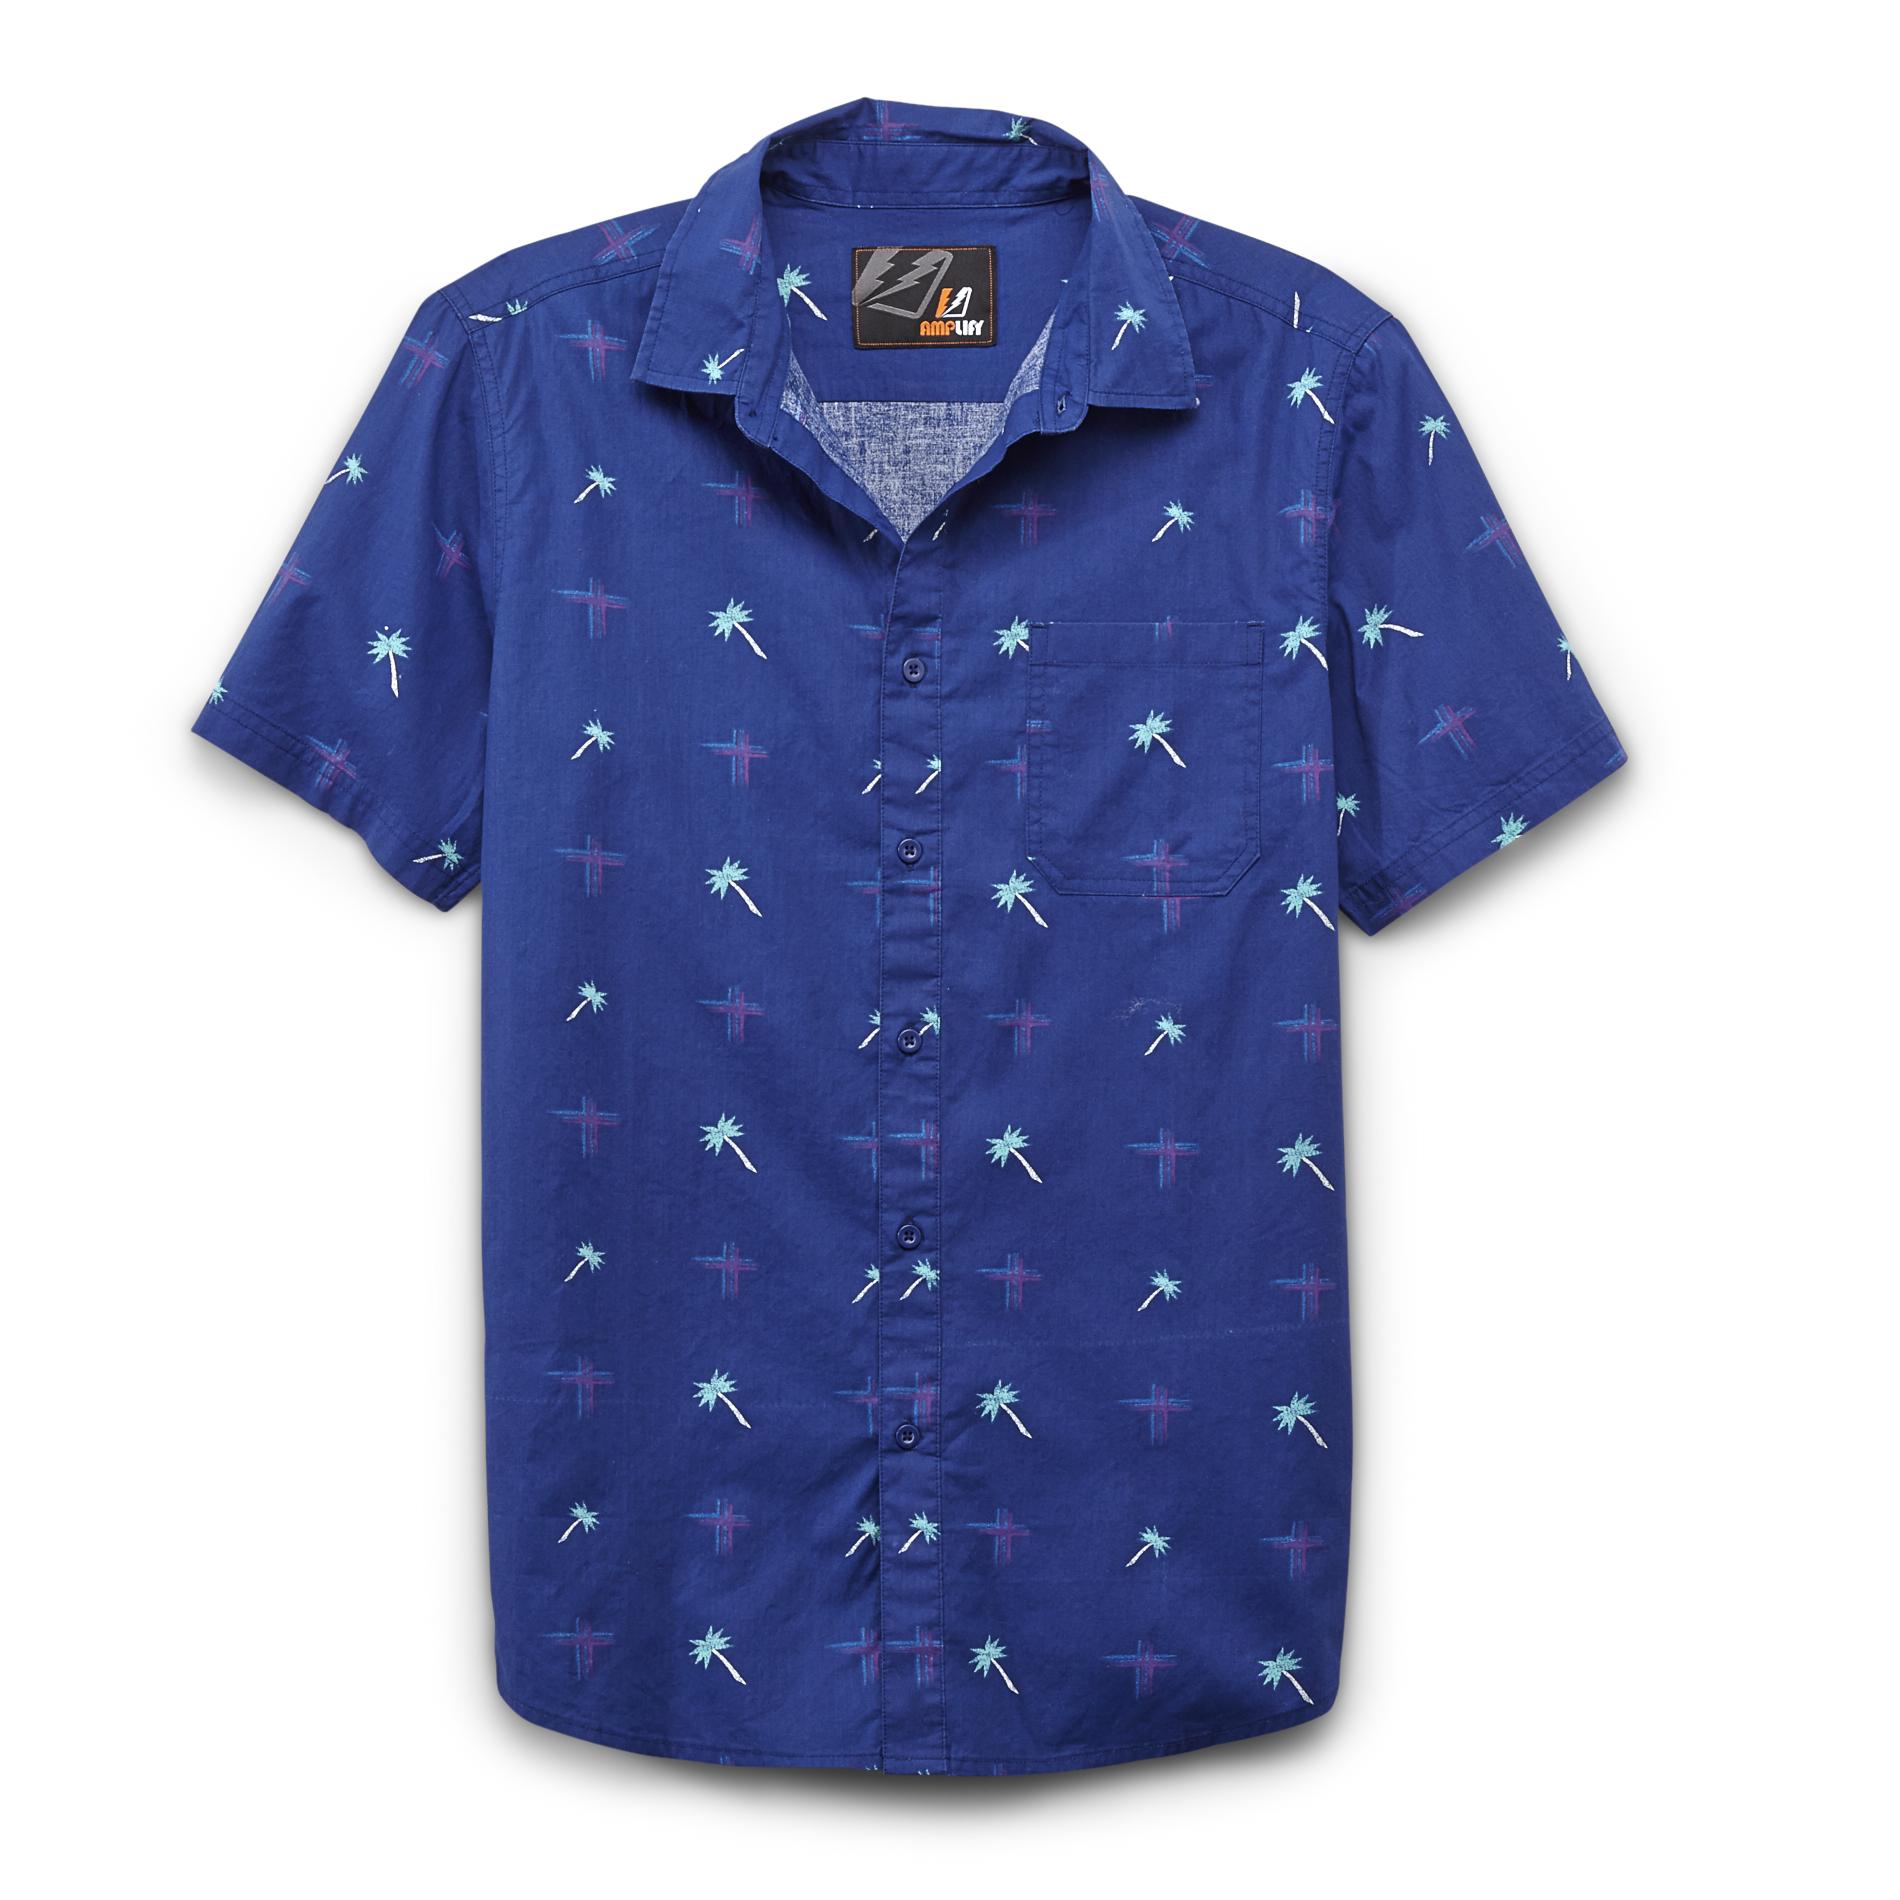 Amplify Young Men's Woven Shirt - Palm Trees & Crosses